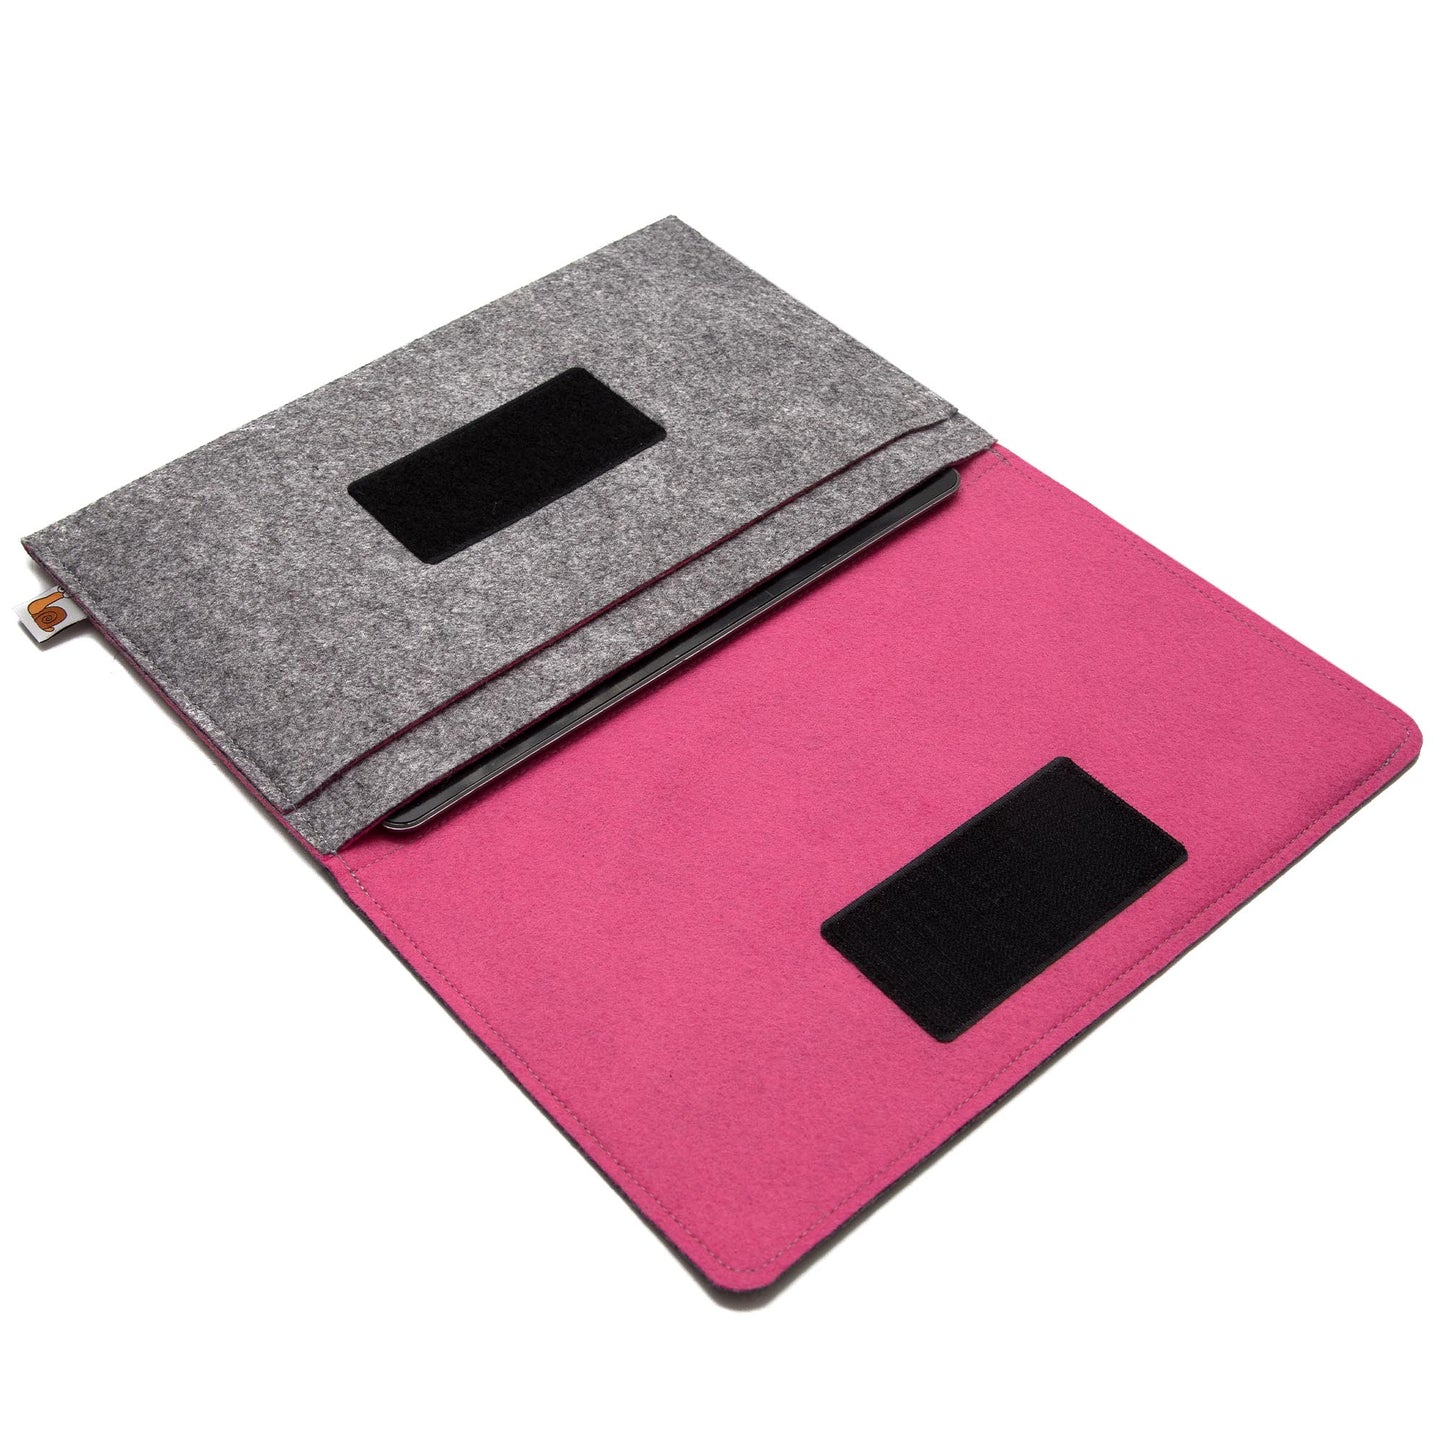 Premium Felt iPad Cover: Ultimate Protection with Accessories Pocket - Grey & Pink